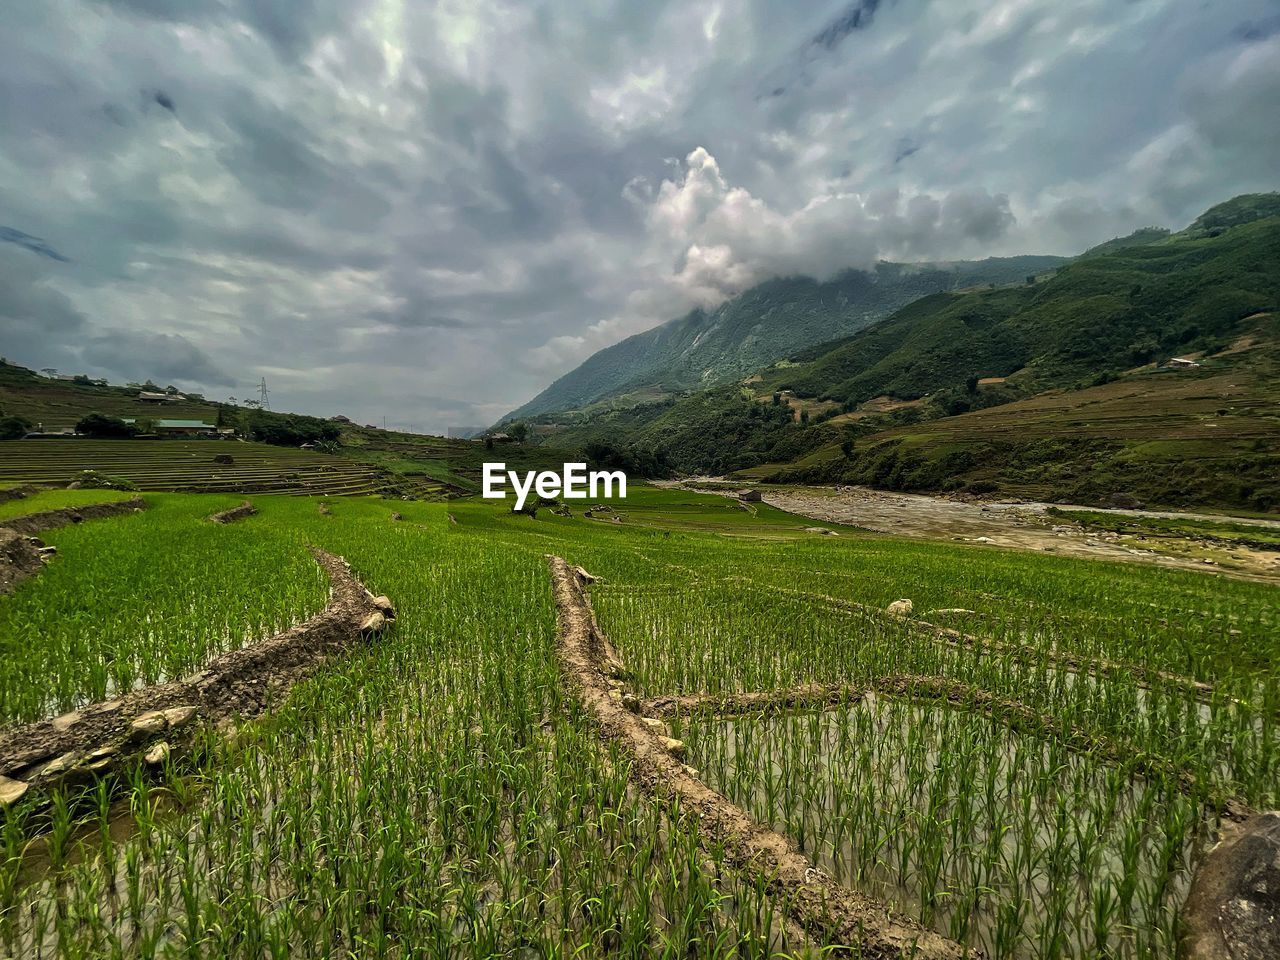 landscape, environment, land, rural scene, agriculture, cloud, scenics - nature, sky, field, plant, nature, mountain, crop, beauty in nature, farm, green, grass, social issues, rural area, grassland, paddy field, valley, food and drink, environmental conservation, rice paddy, highland, no people, food, rice, travel, meadow, growth, tranquility, mountain range, outdoors, water, rice - food staple, travel destinations, cereal plant, tranquil scene, plain, plateau, overcast, tourism, tree, dramatic sky, flower